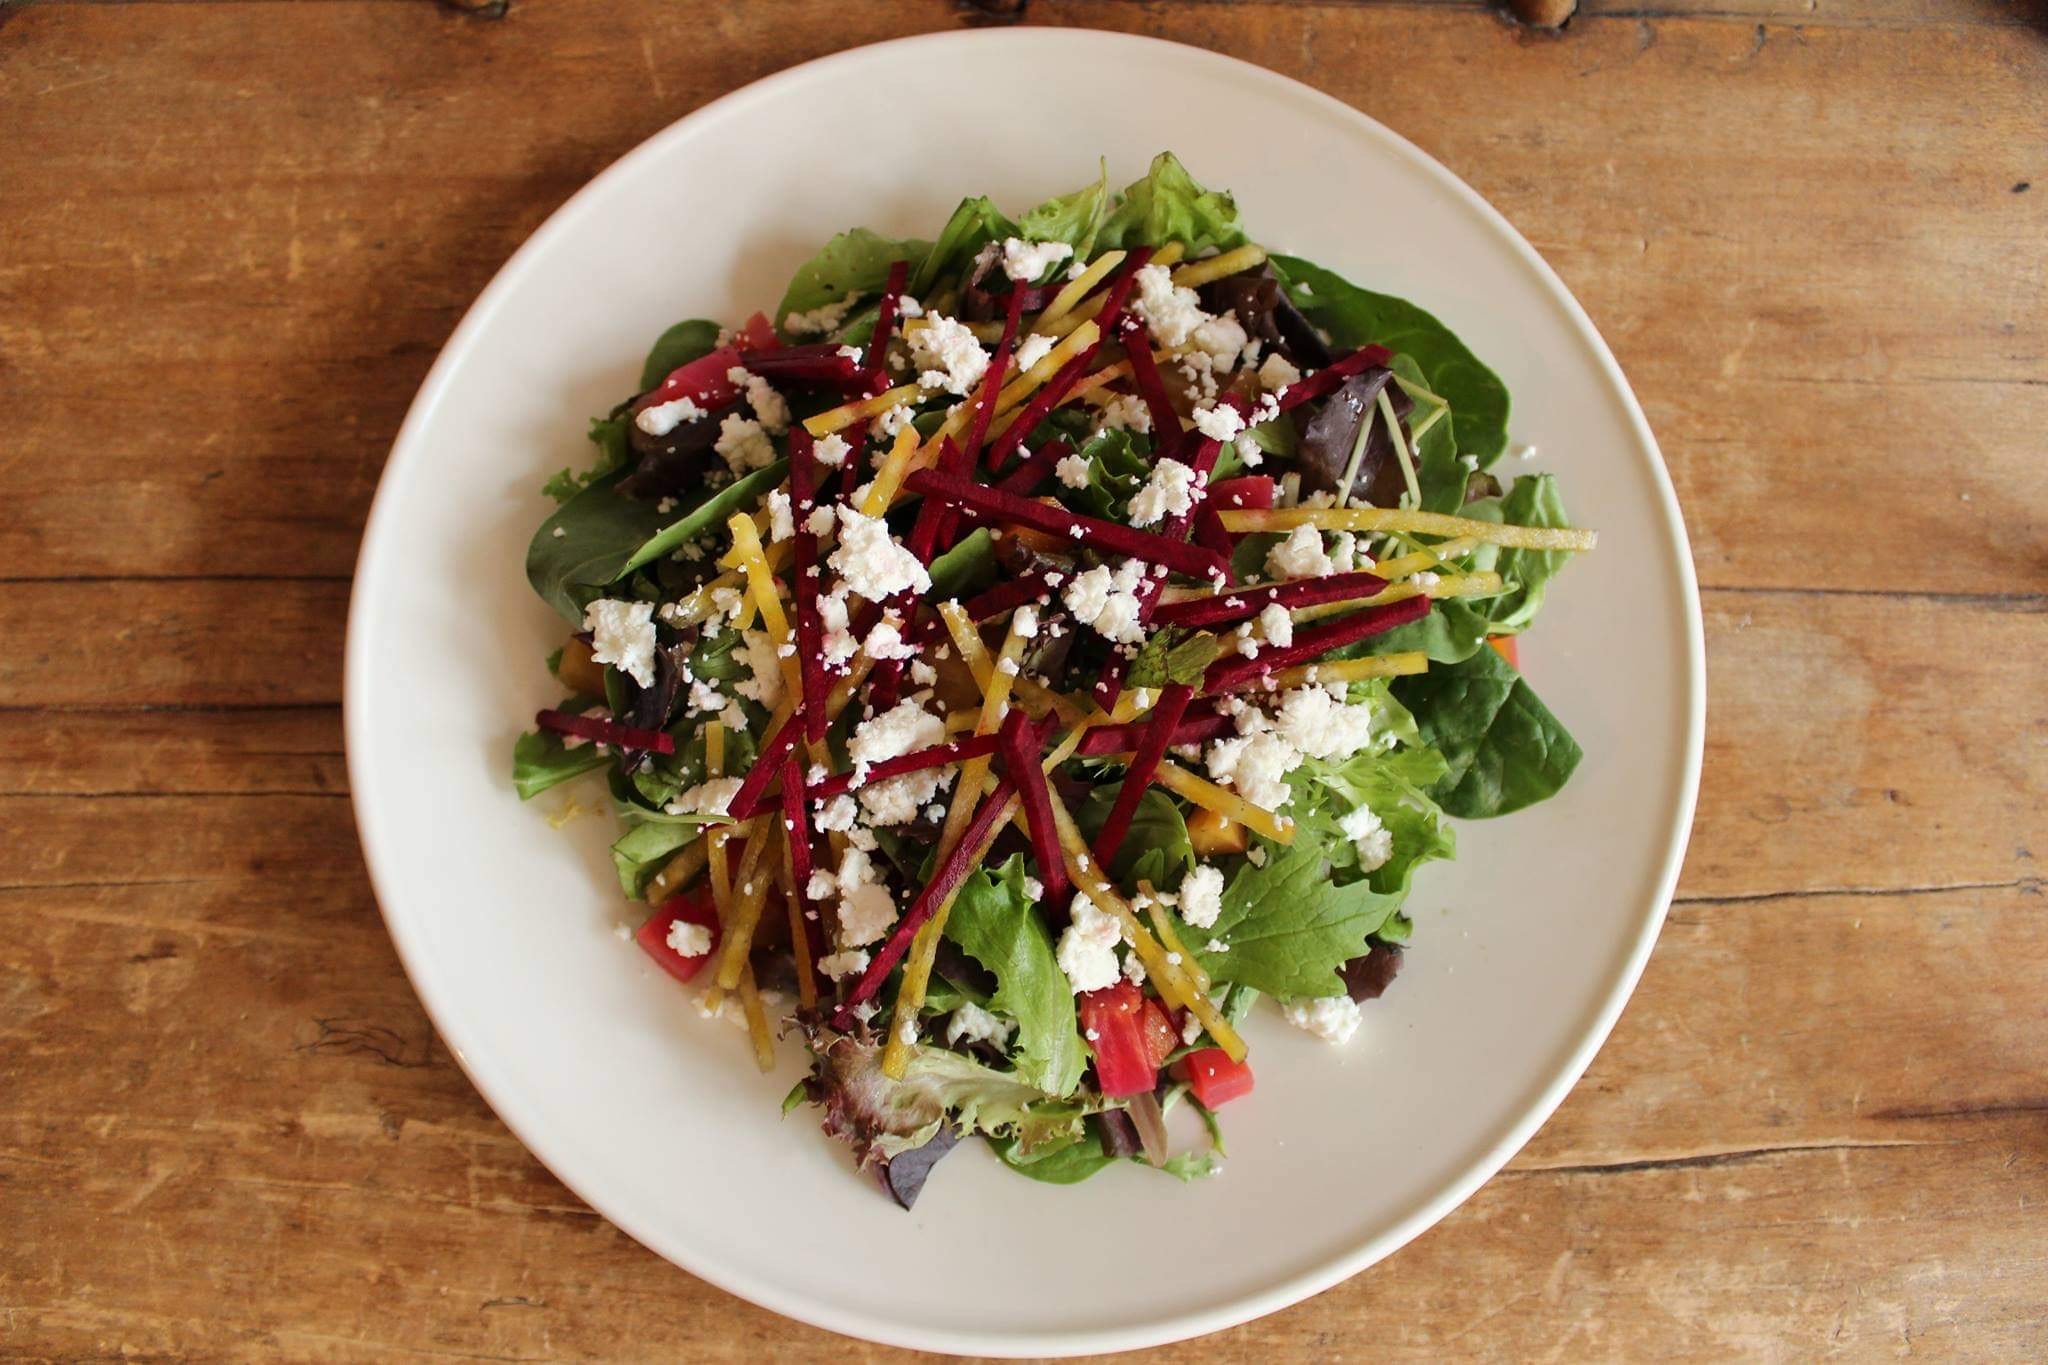 A fresh garden salad with beets, goat cheese, and tomatoes on a bed of greens.